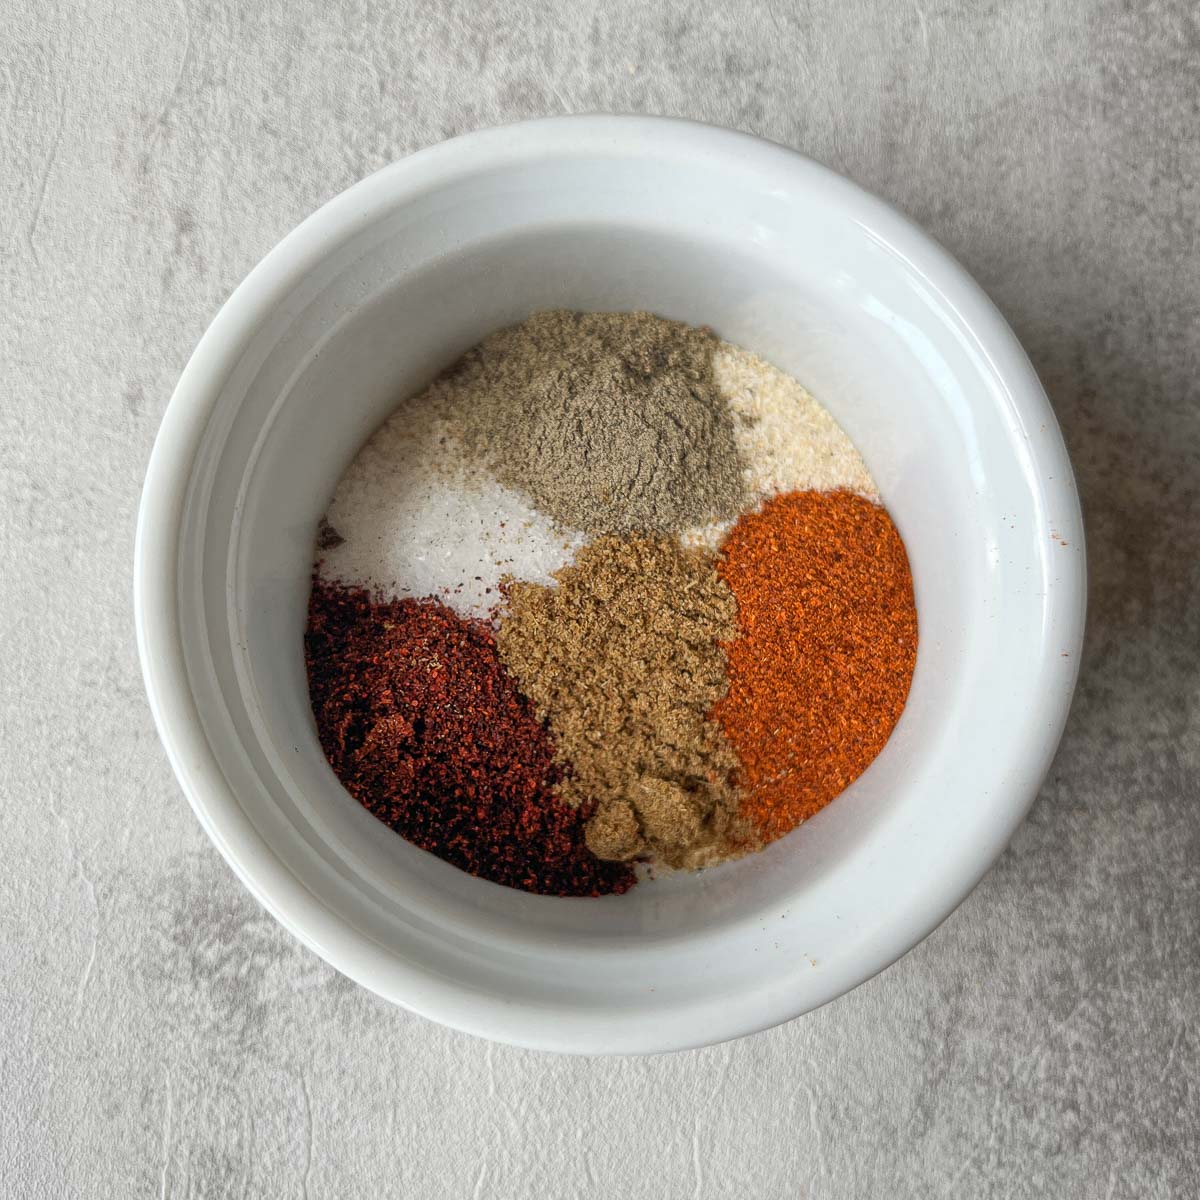 unmixed spices in a small bowl